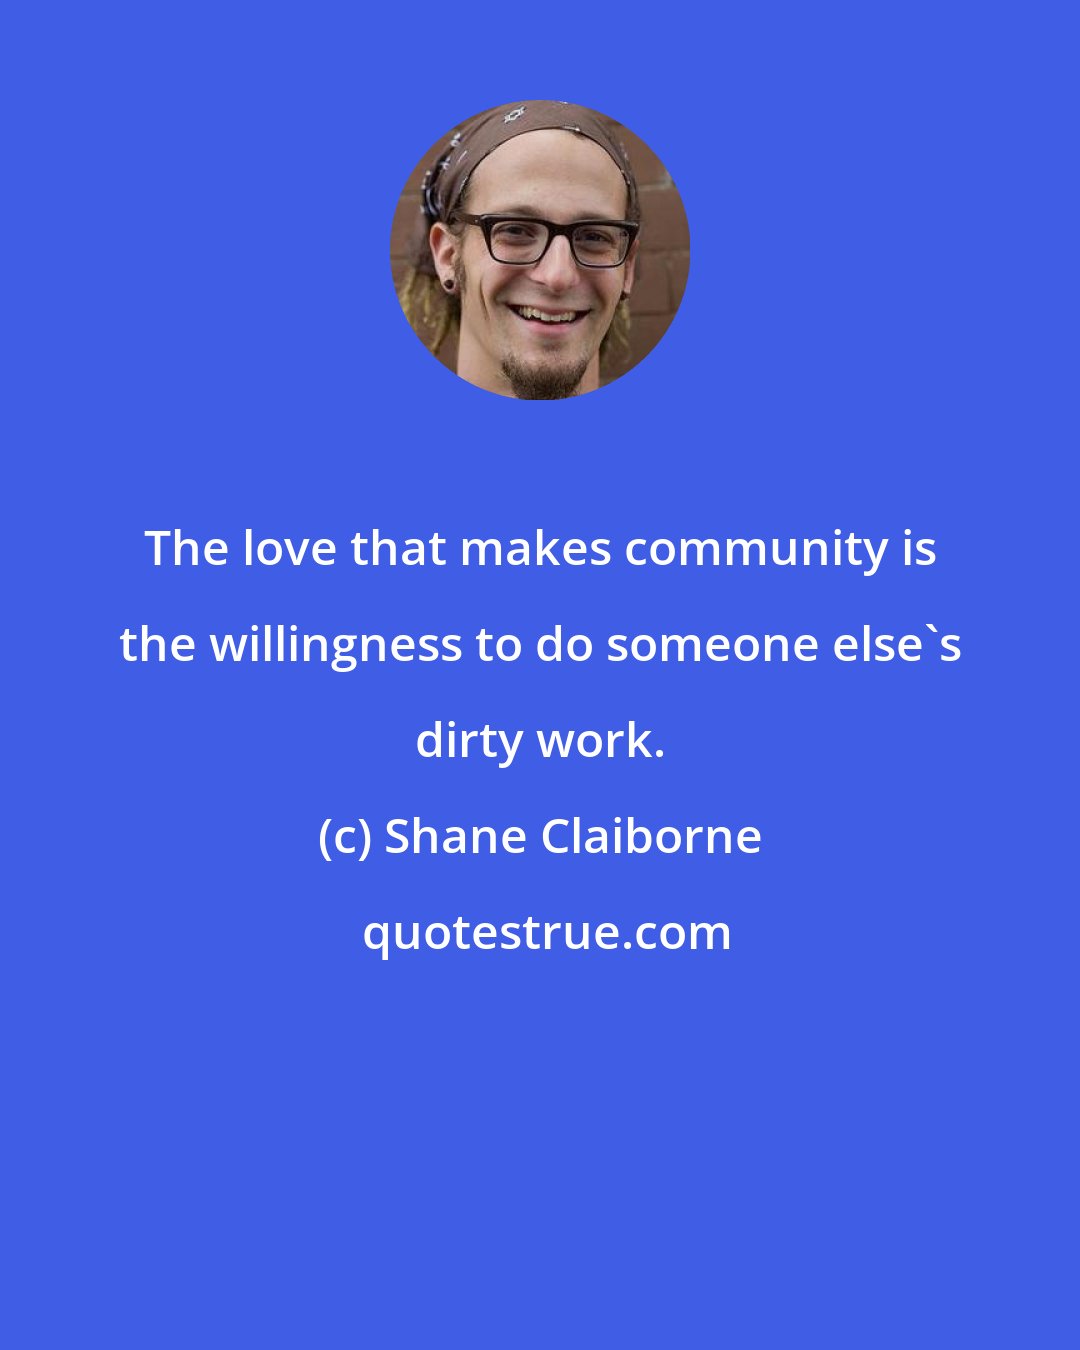 Shane Claiborne: The love that makes community is the willingness to do someone else's dirty work.